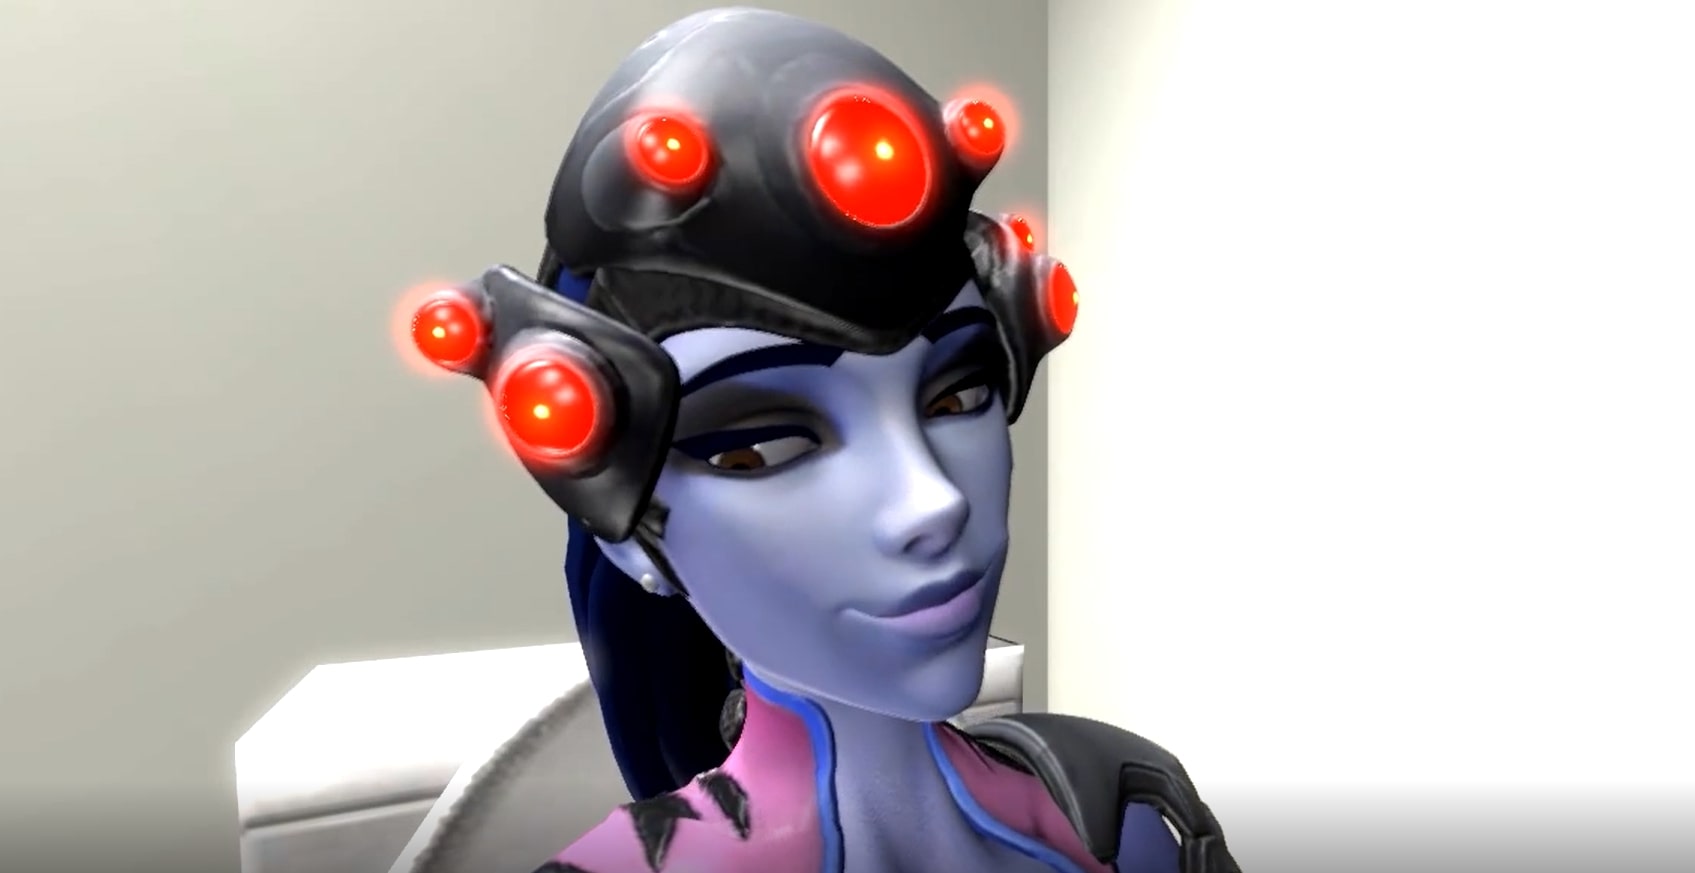 widowmaker takes out a target